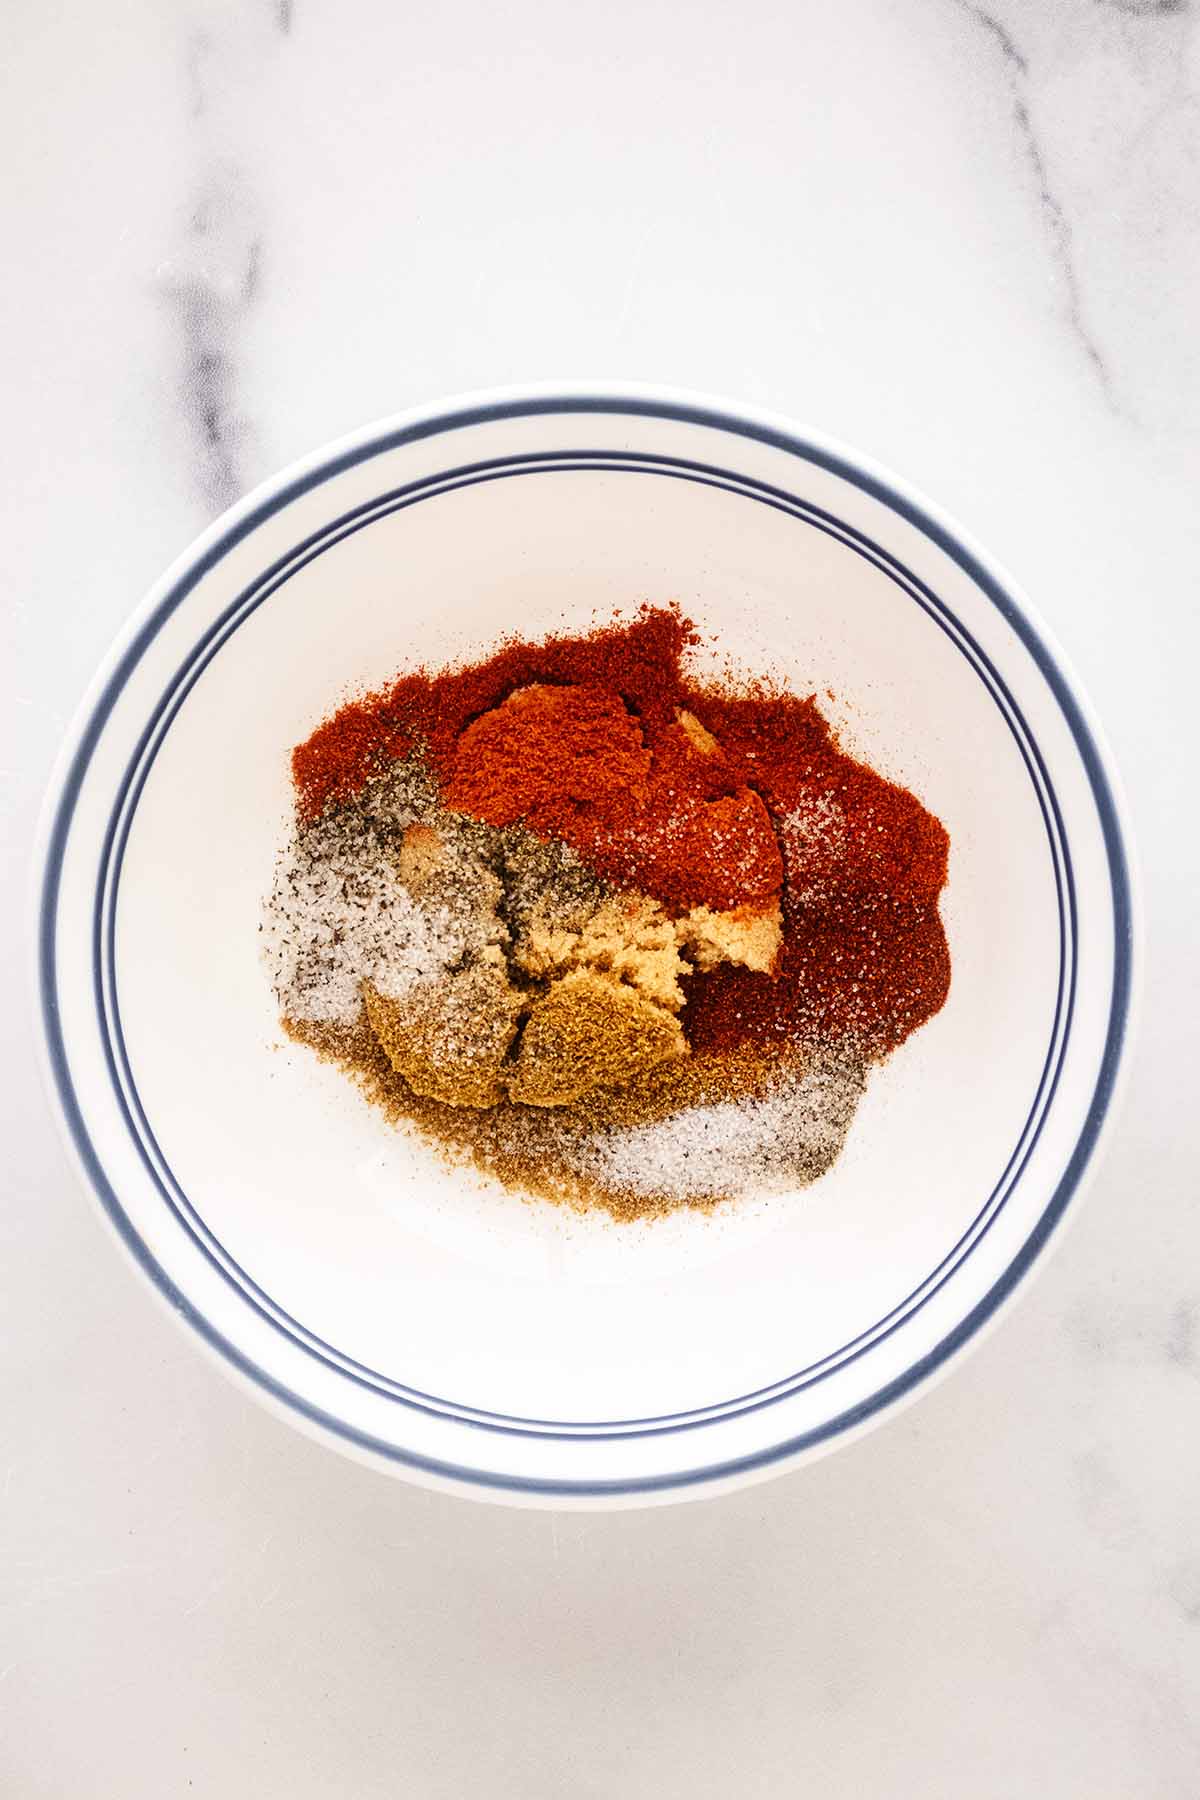 Ingredients for spice rub in a small white bowl